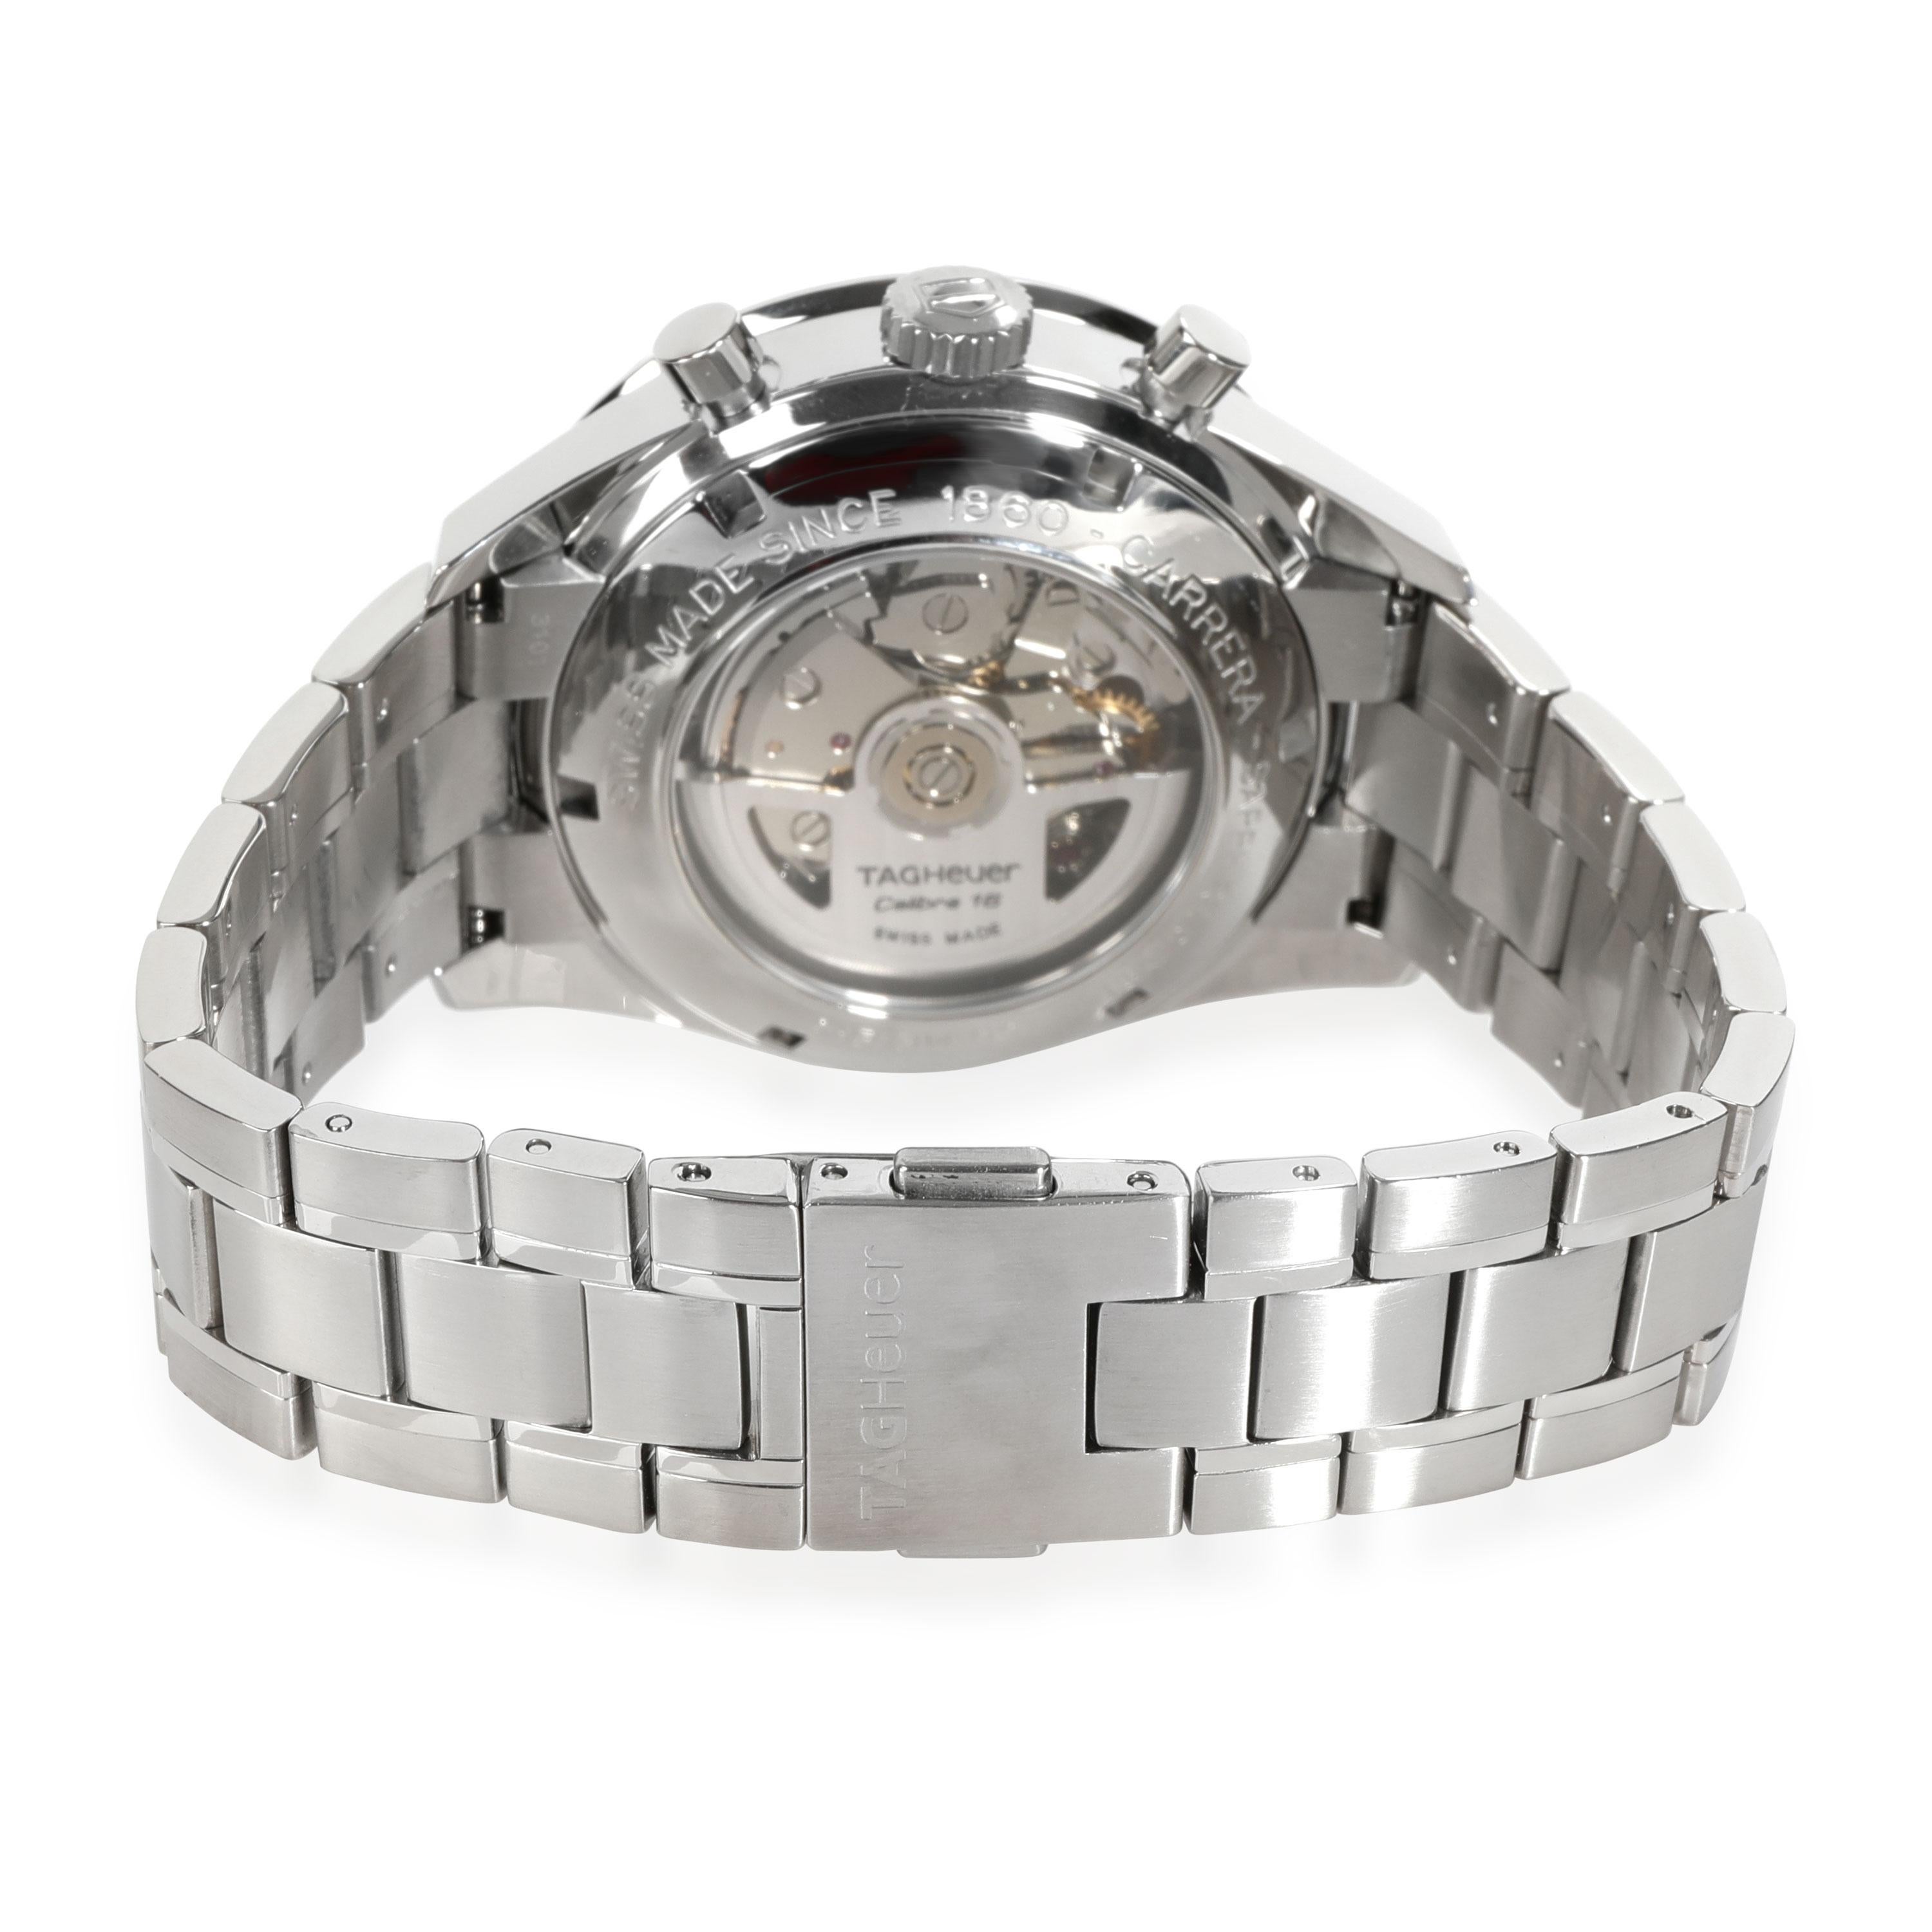 
Tag Heuer Carrera CV2010.BA0786 Men's Watch in Stainless Steel

SKU: 109904

PRIMARY DETAILS
Brand:  Tag Heuer
Model: Carrera
Country of Origin: Switzerland
Movement Type: Mechanical: Automatic/Kinetic
Year Manufactured: 
Year of Manufacture: